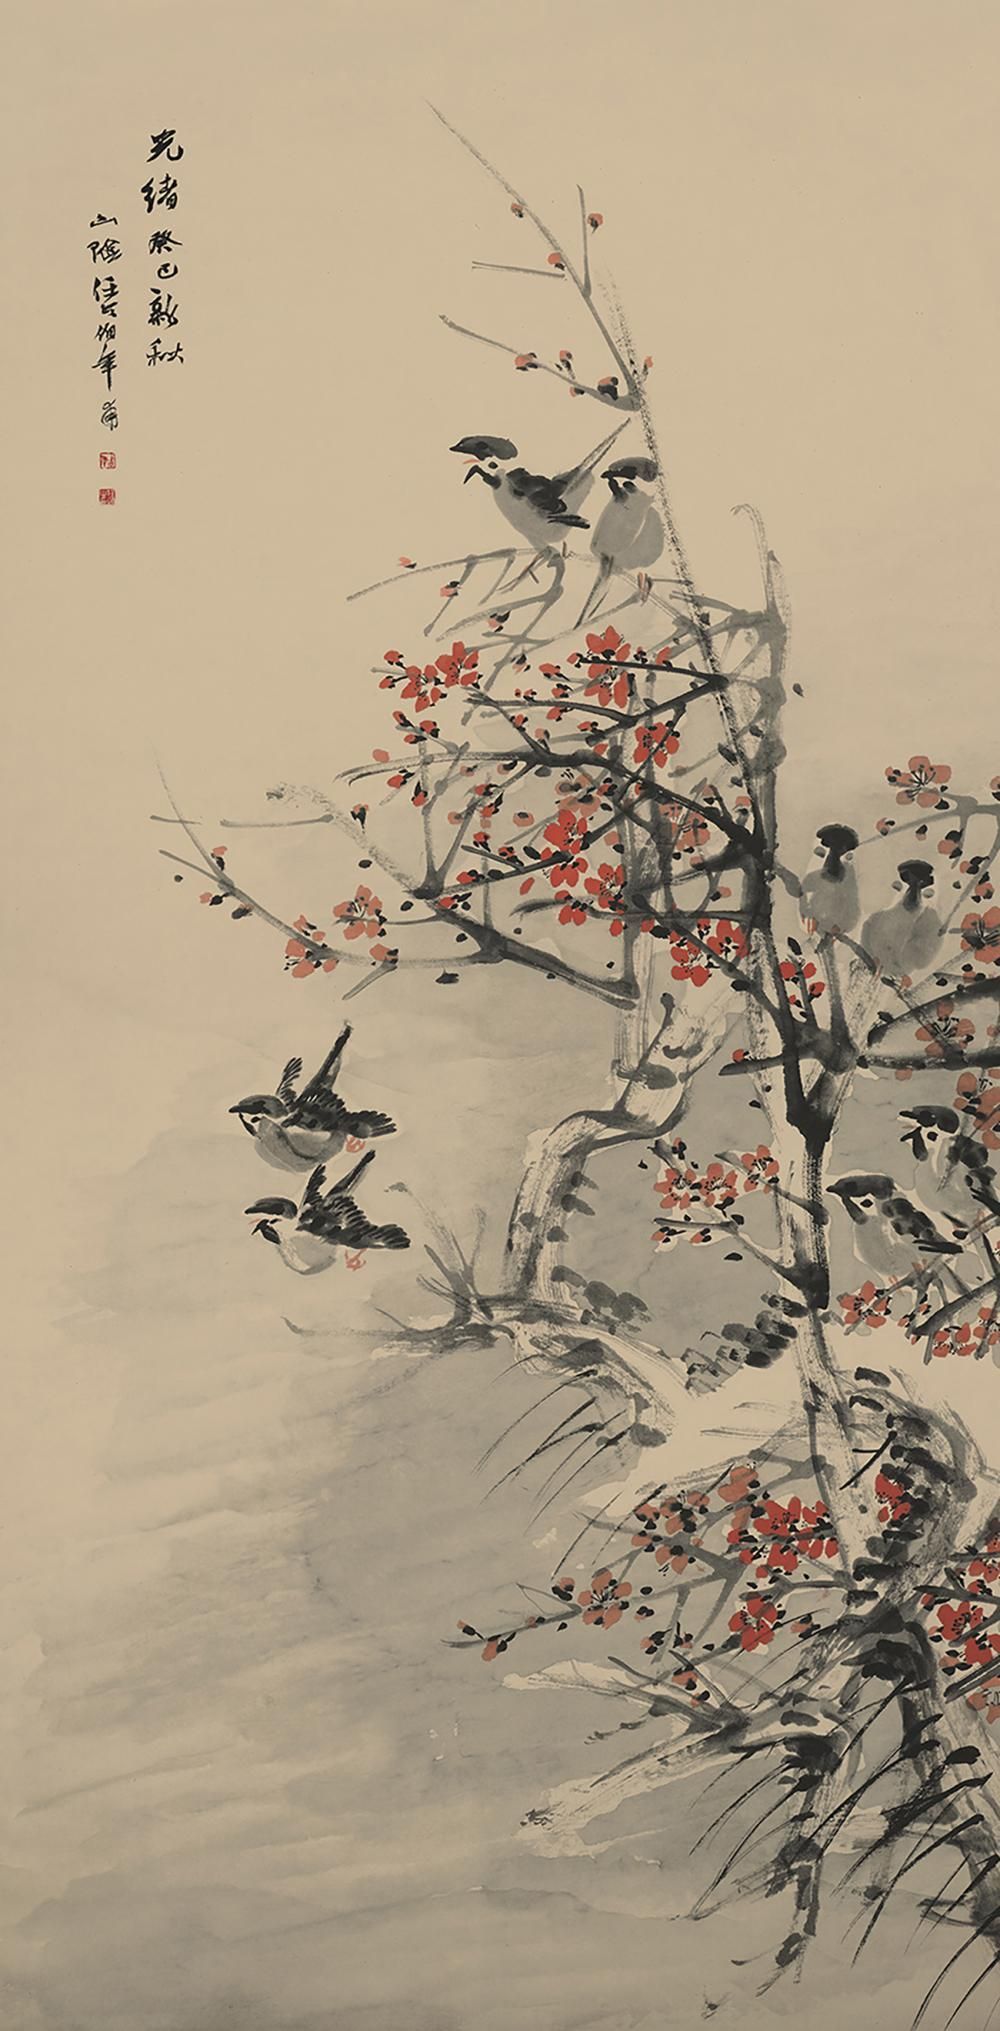 Sold Price: A Chinese Painting 0119 10:00 AM MST. Art wallpaper iphone, Japanese art, Japanese artwork